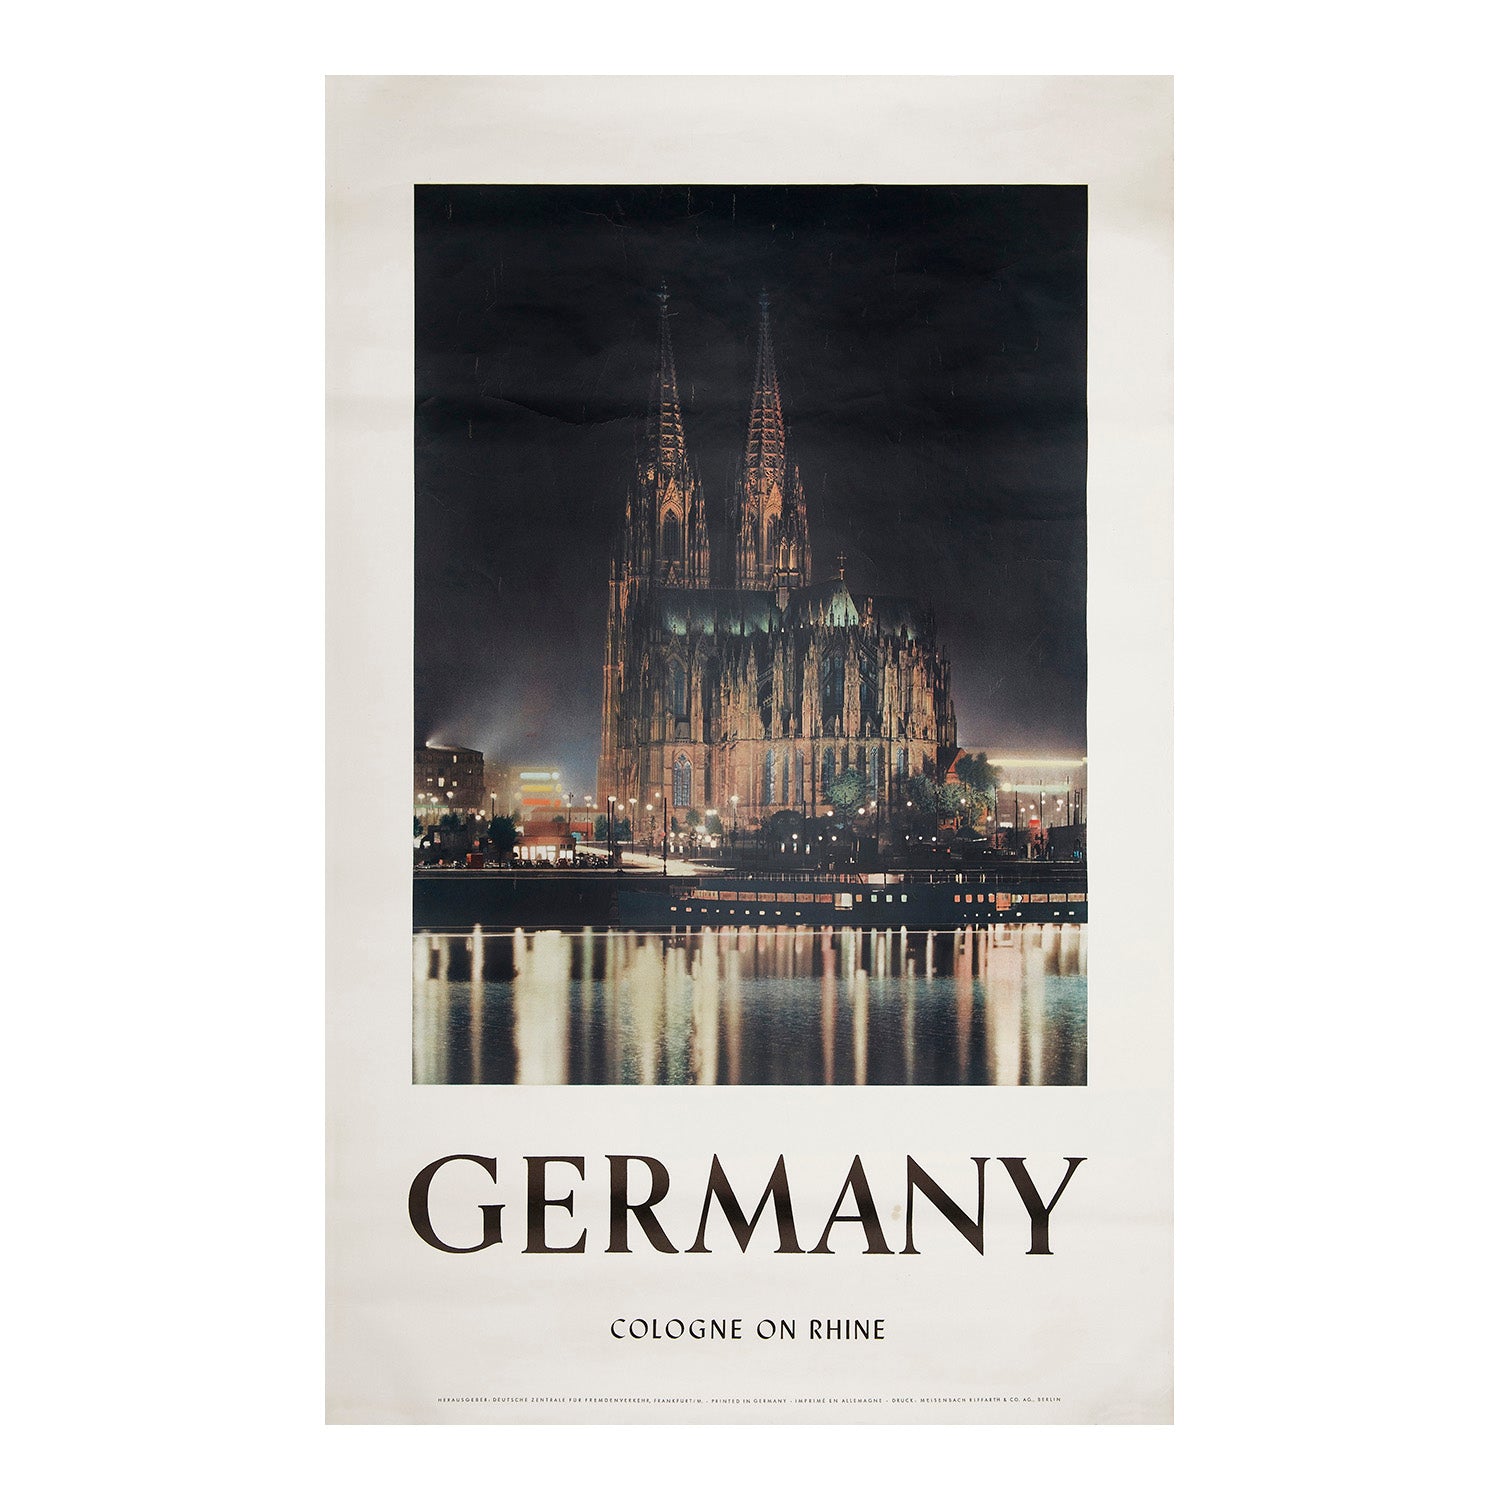 Original, photographic poster for Cologne published by the German National Tourist Board, c. 1950. Poster shows Cologne at night, with the caption 'Germany, Cologne on Rhine'.